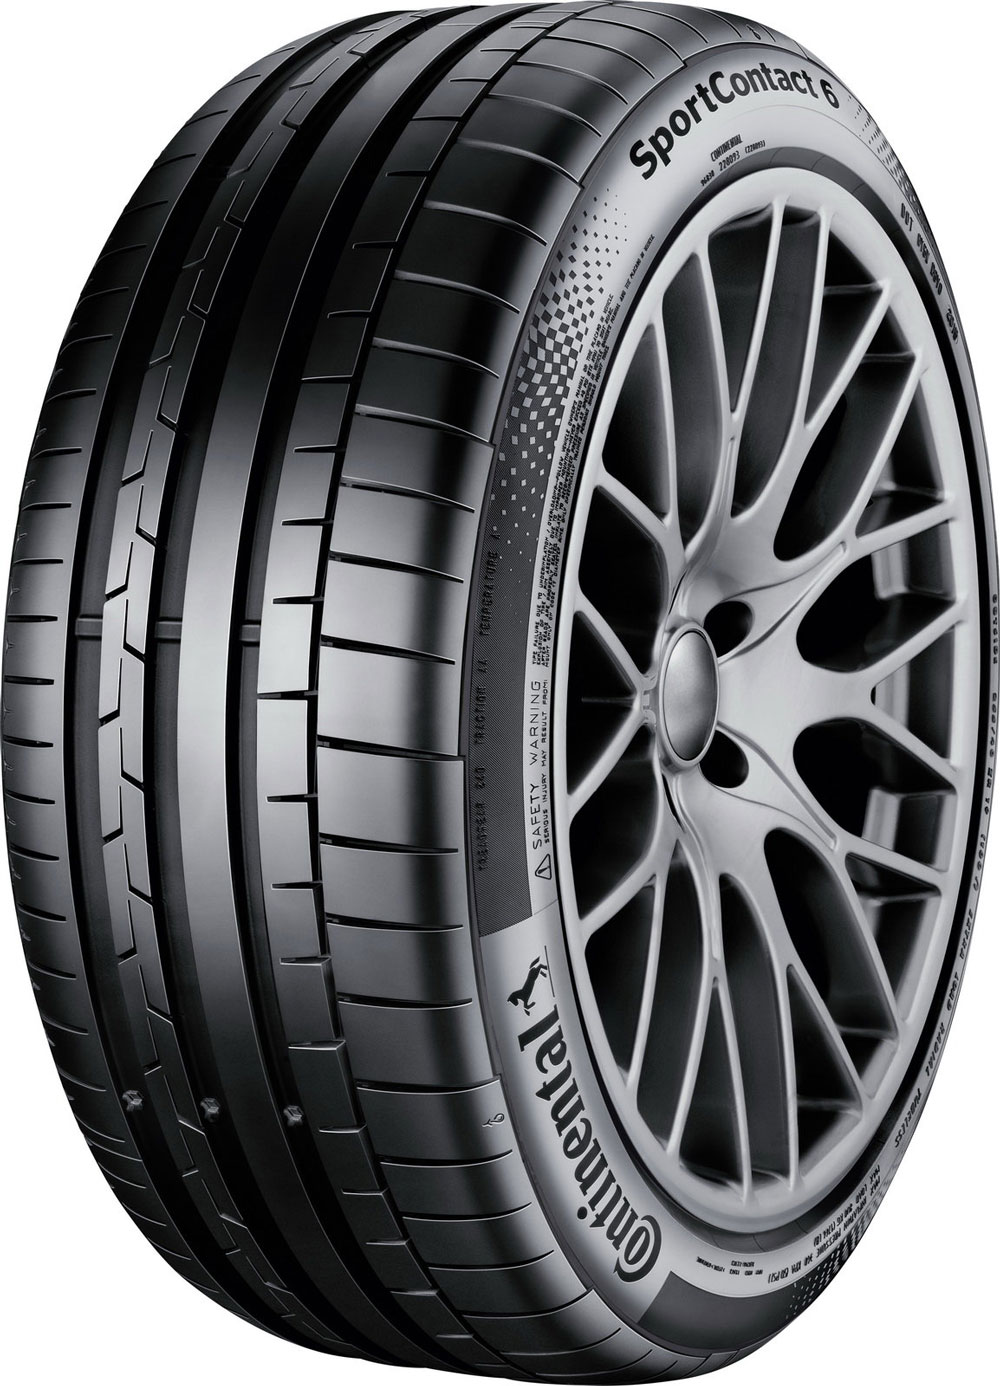 Автомобилни гуми CONTINENTAL SPORT CONTACT 6 FP 235/40 R18 95Y